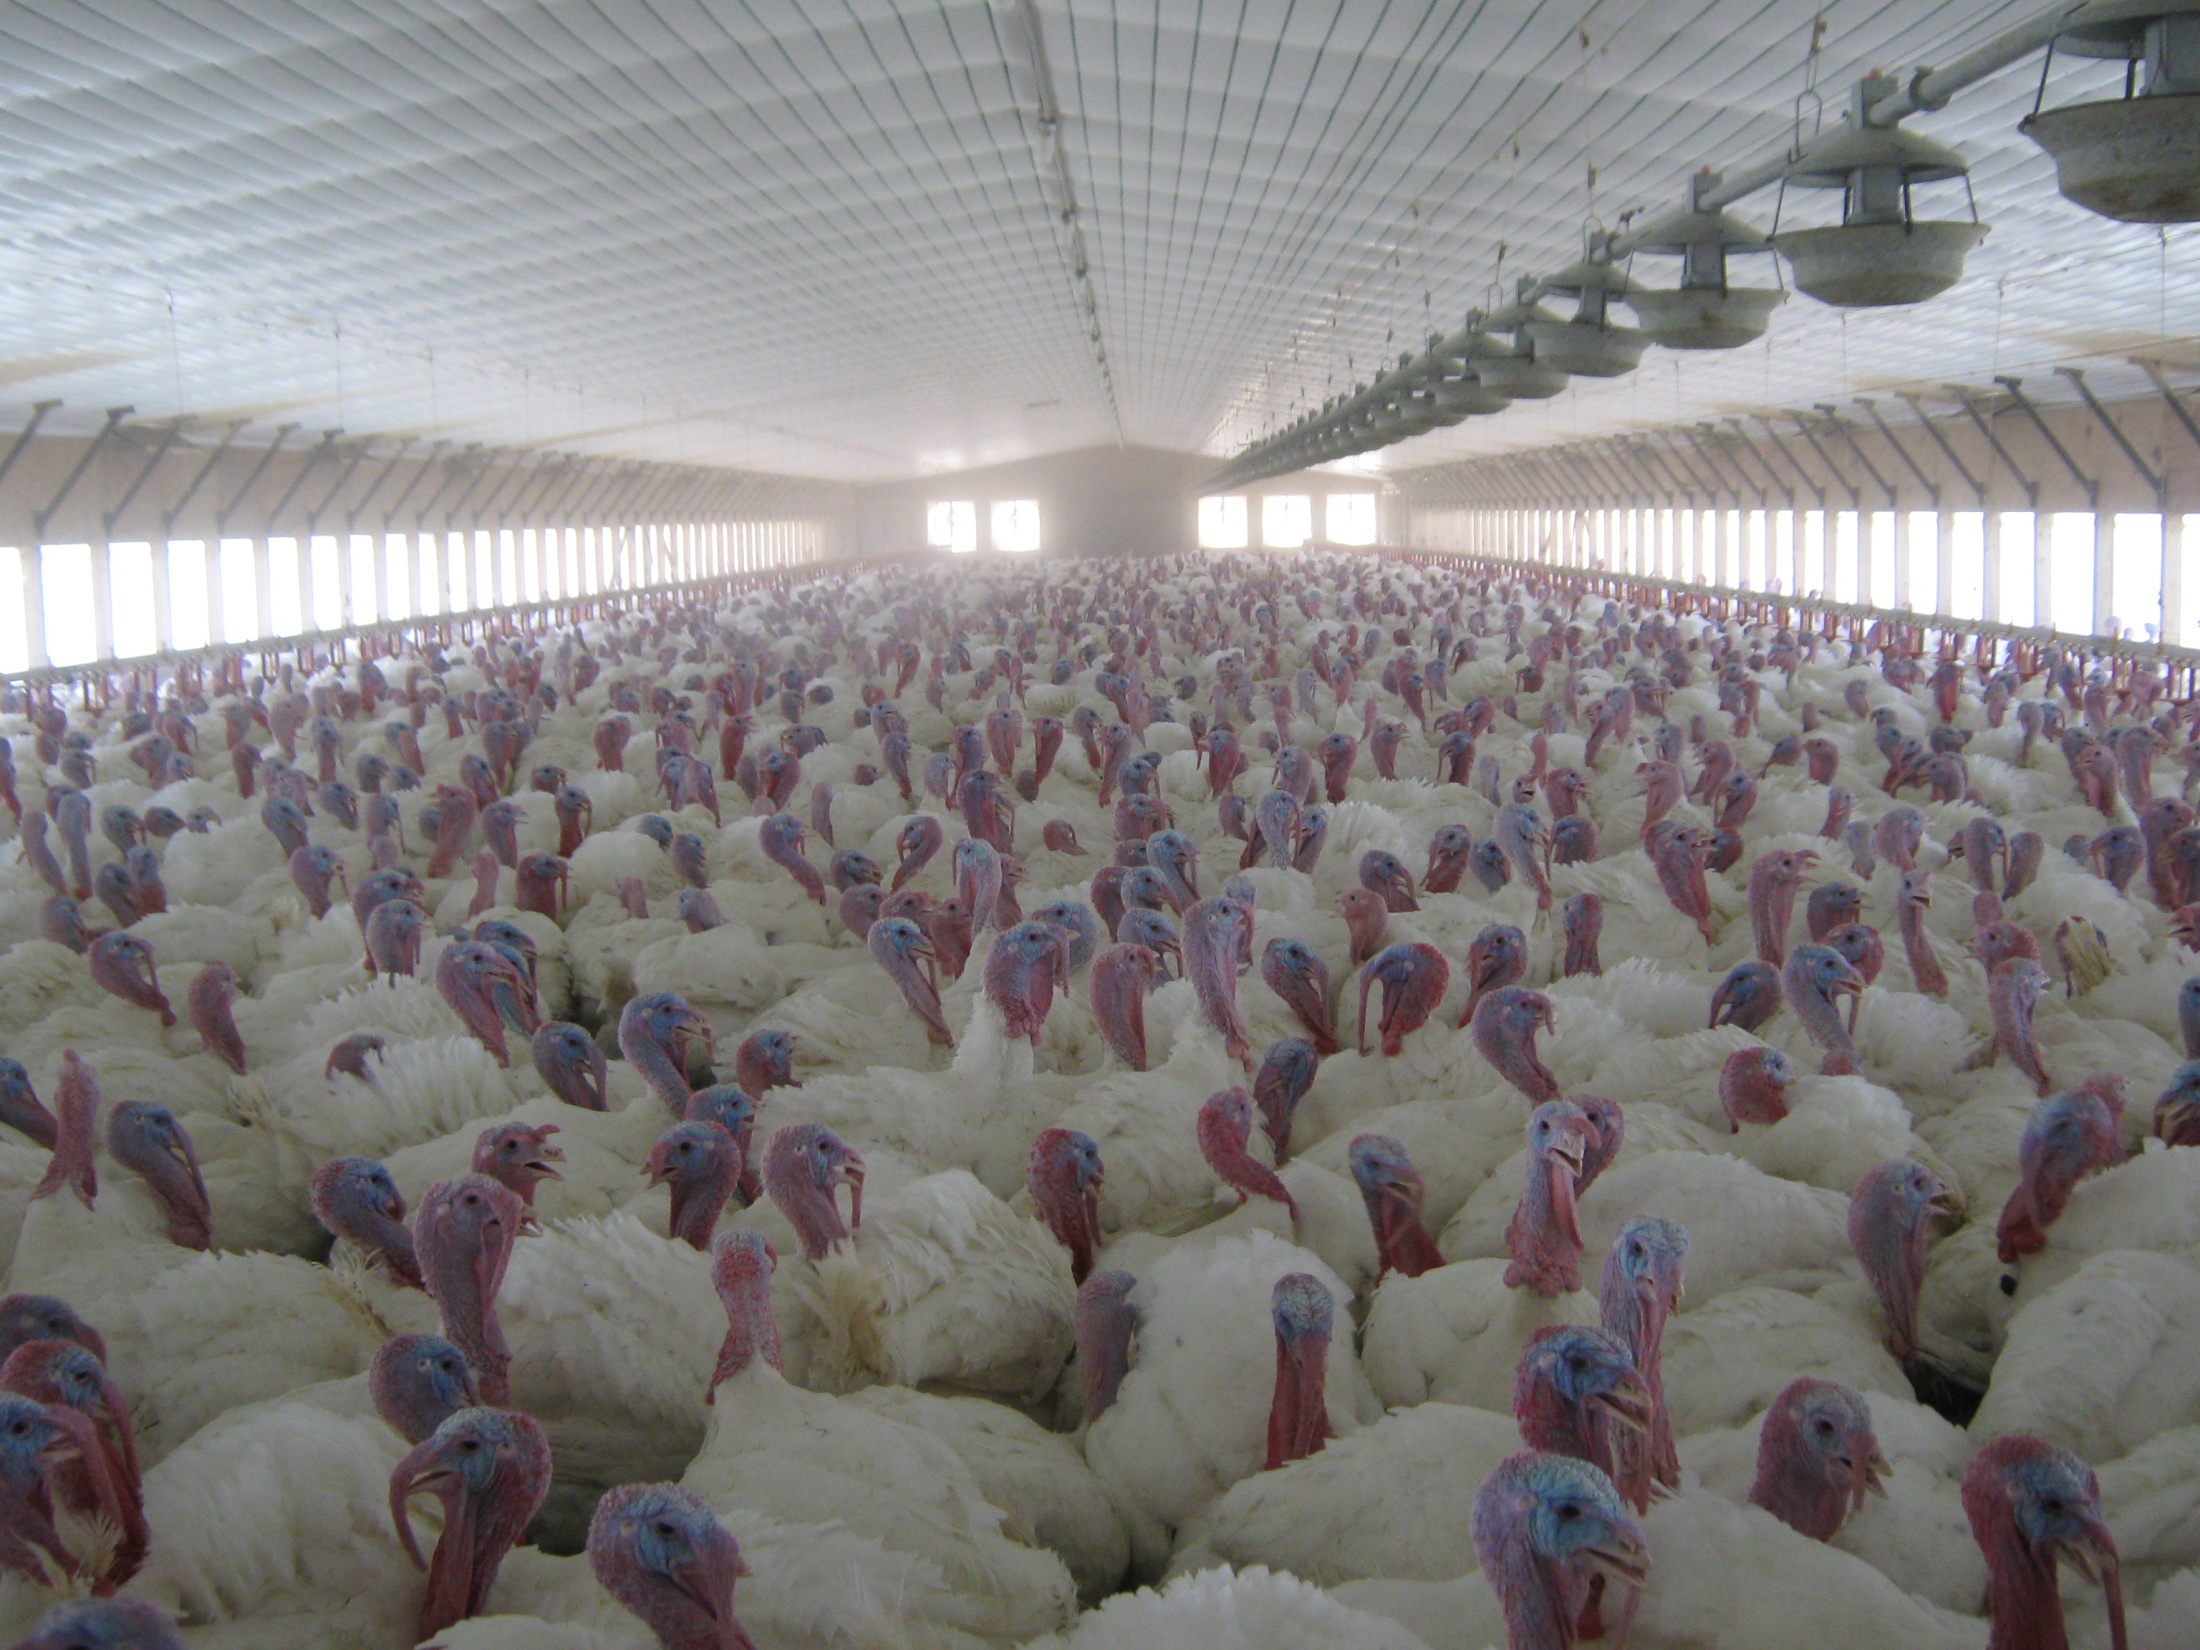 Turkeys in a commecial poultry house.